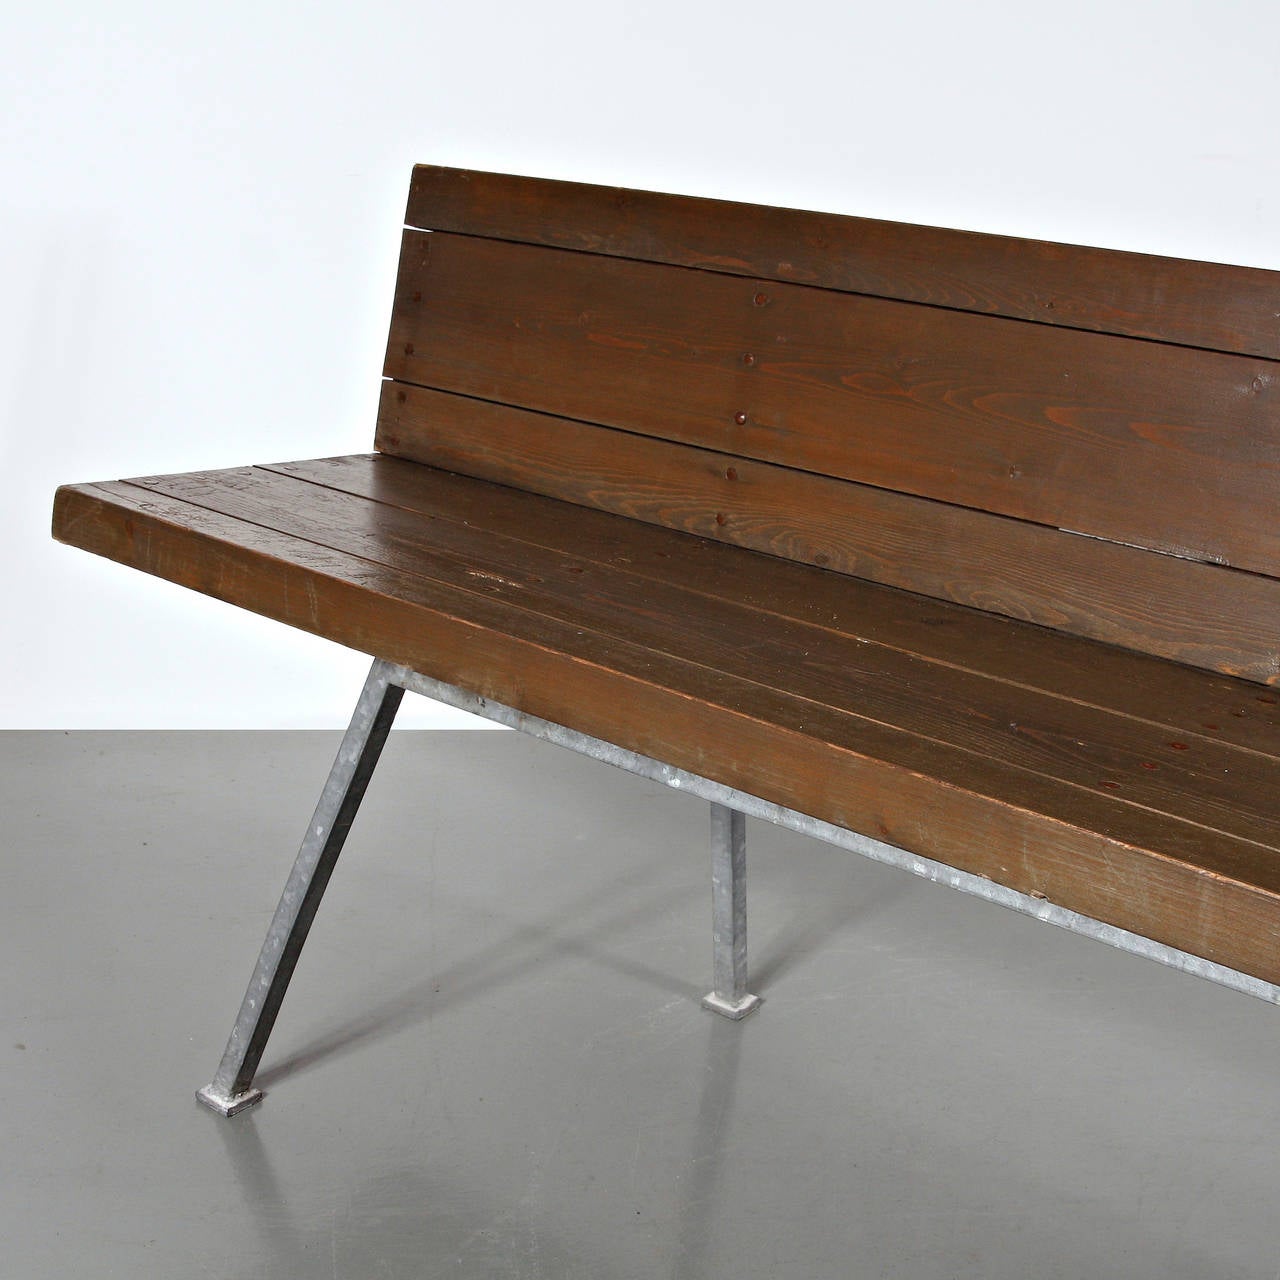 Bench designed by Dom Hans van der Laan for the Abbey Church of St. Benedictusberg, Vaals in the Netherlands in 1967.
Manufactured in the Netherlands in 1967.
Galvanized base and structure, wood seat and backrest with copper nails.

In good